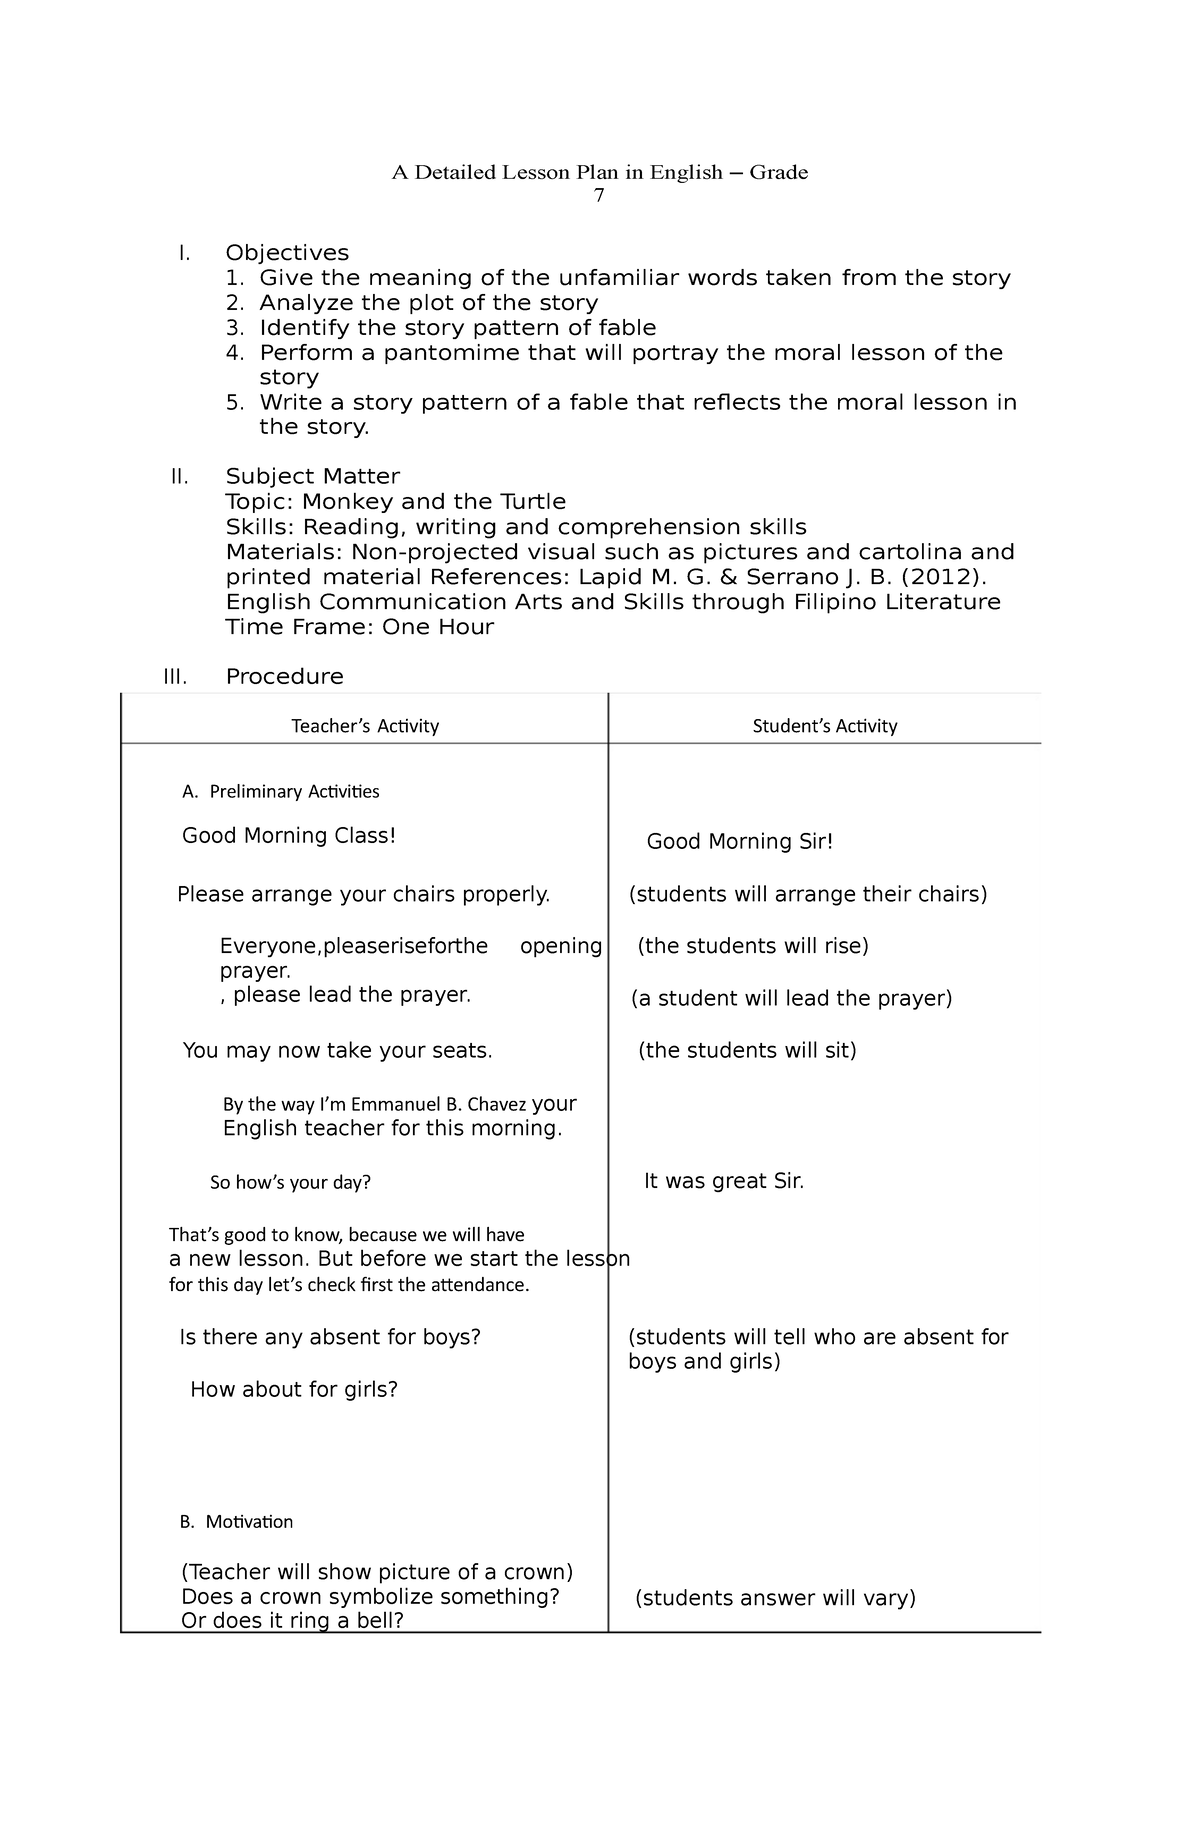 Lesson plan in grade 7 - Teacher’s Activity Student’s Activity A ...